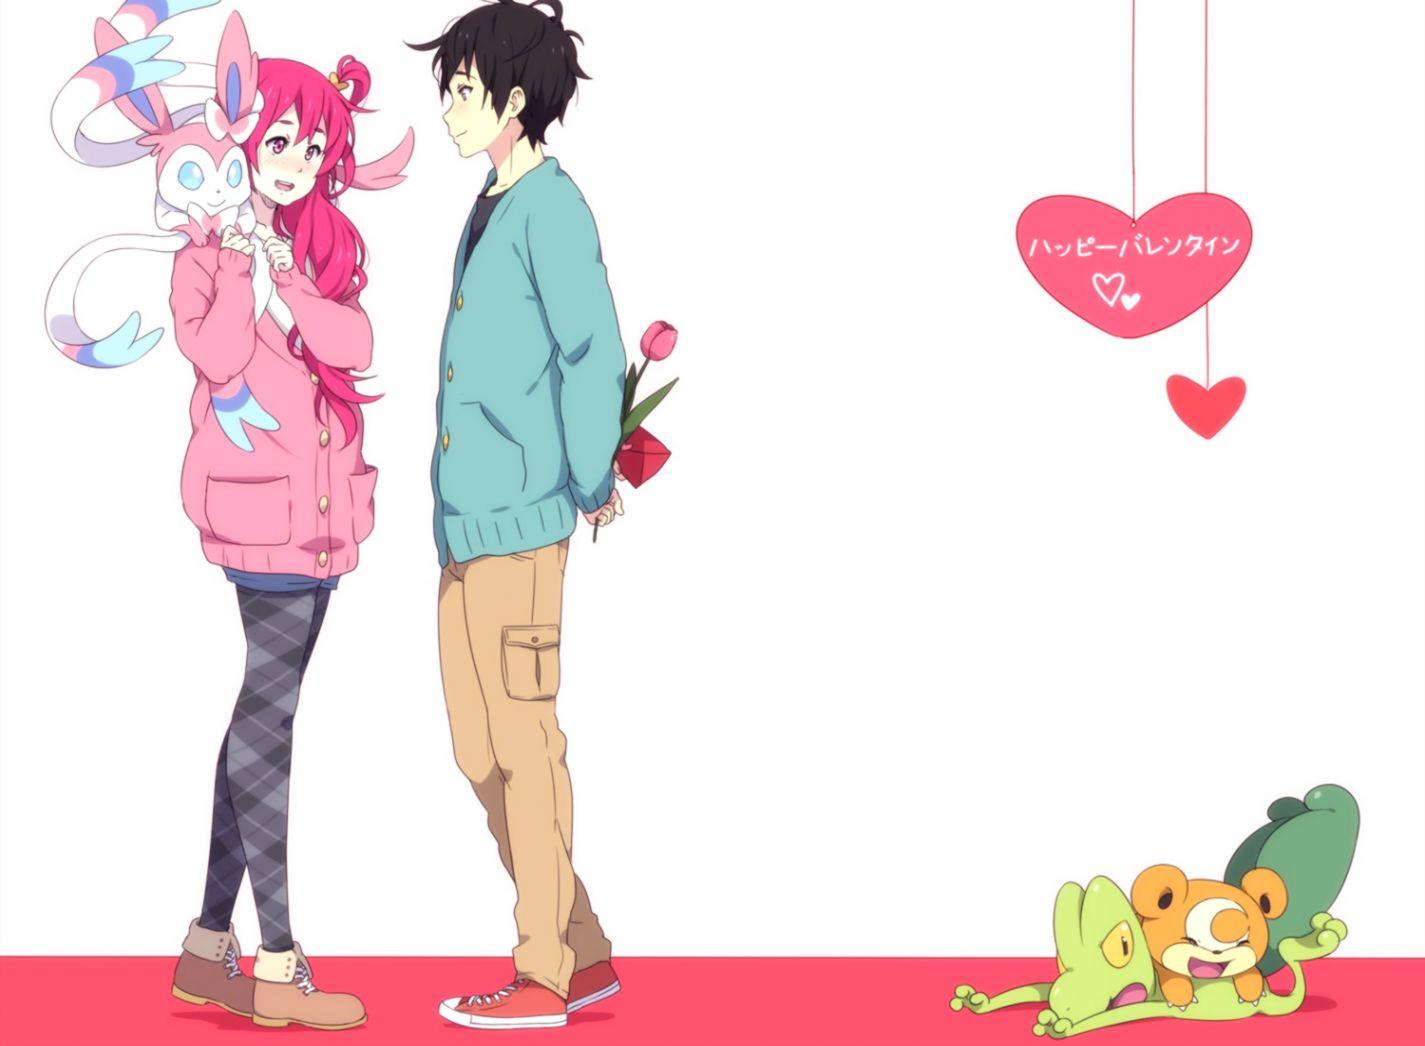 Love Couple Anime Valentine Day Wallpaper HD. Important